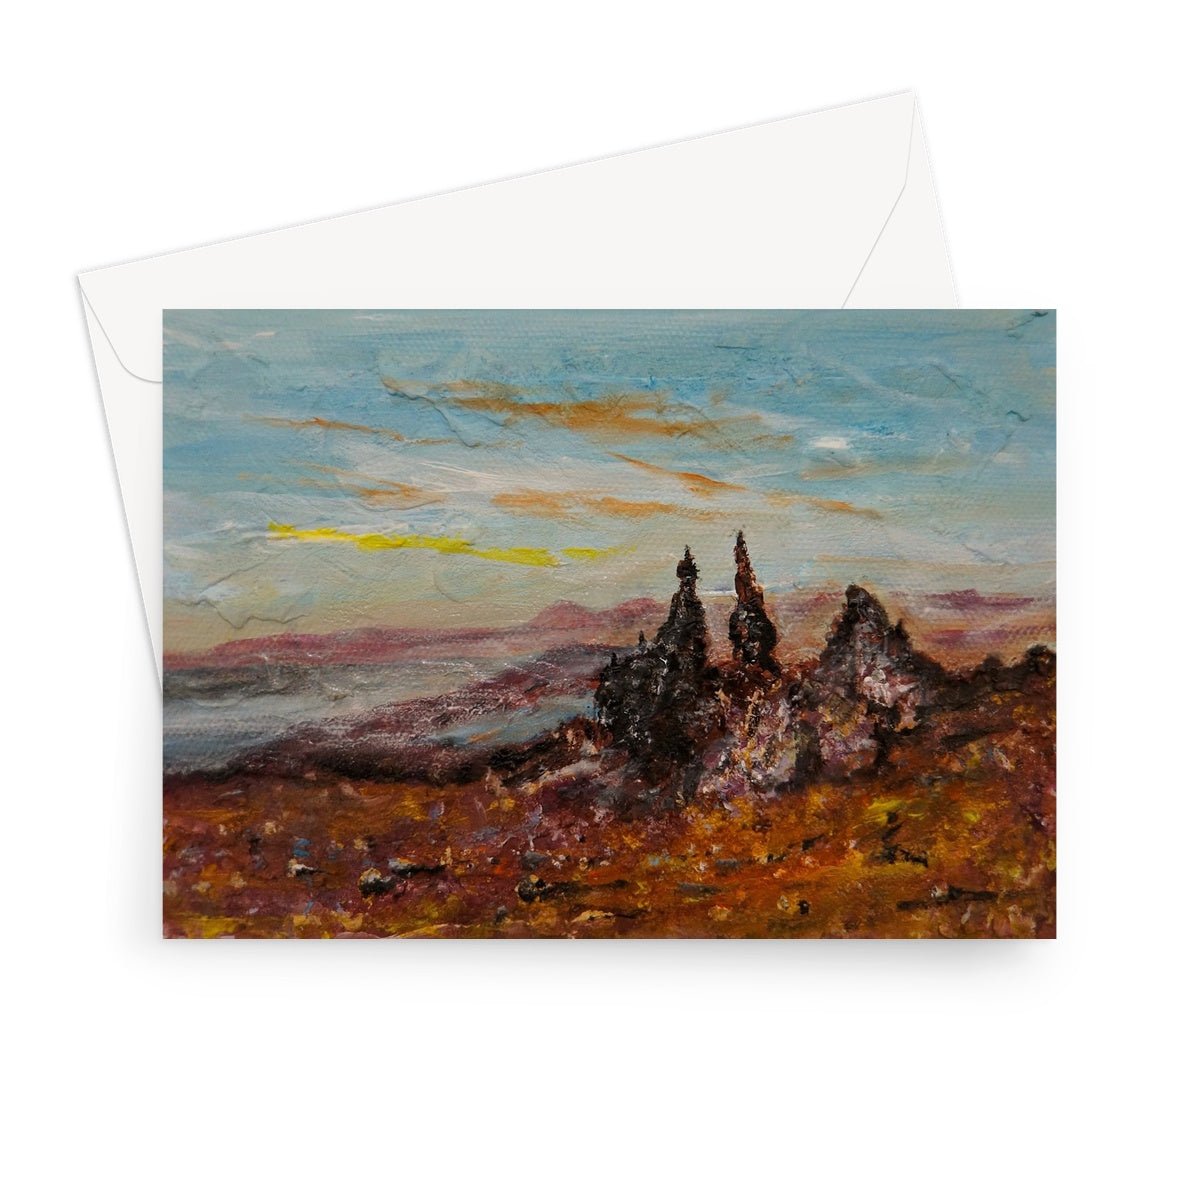 The Old Man Of Storr Skye Art Gifts Greeting Card-Greetings Cards-Skye Art Gallery-7"x5"-10 Cards-Paintings, Prints, Homeware, Art Gifts From Scotland By Scottish Artist Kevin Hunter